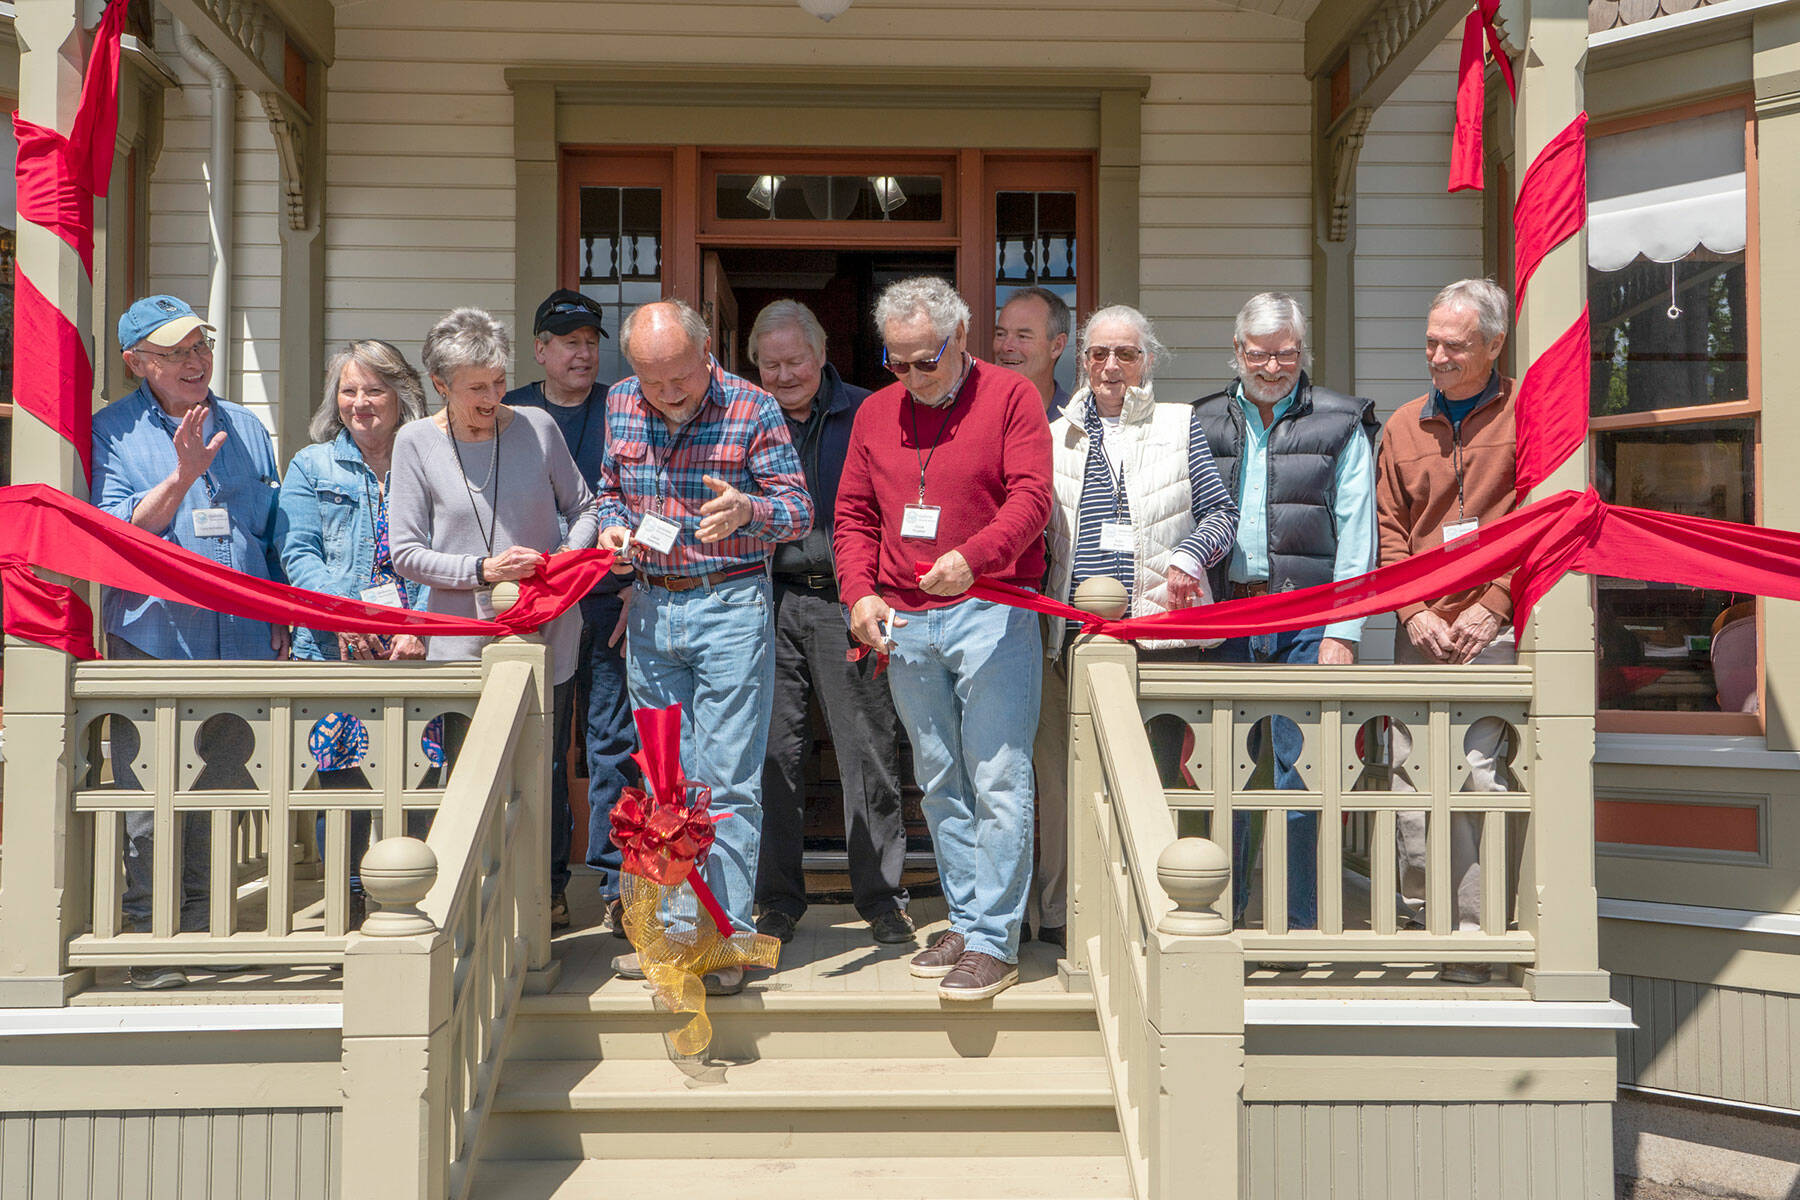 <address>Chair of the Board Christine Satterlee, left, holds the ribbon as Project managers David Satterlee, left, and Chuck Thrasher wield scissors to cut the ribbon to signal the restoration of the 130 year old Worthington House is complete and open to the public. The cutting took place in Quilcene on Friday. (Steve Mullensky/for Peninsula Daily News)</address>